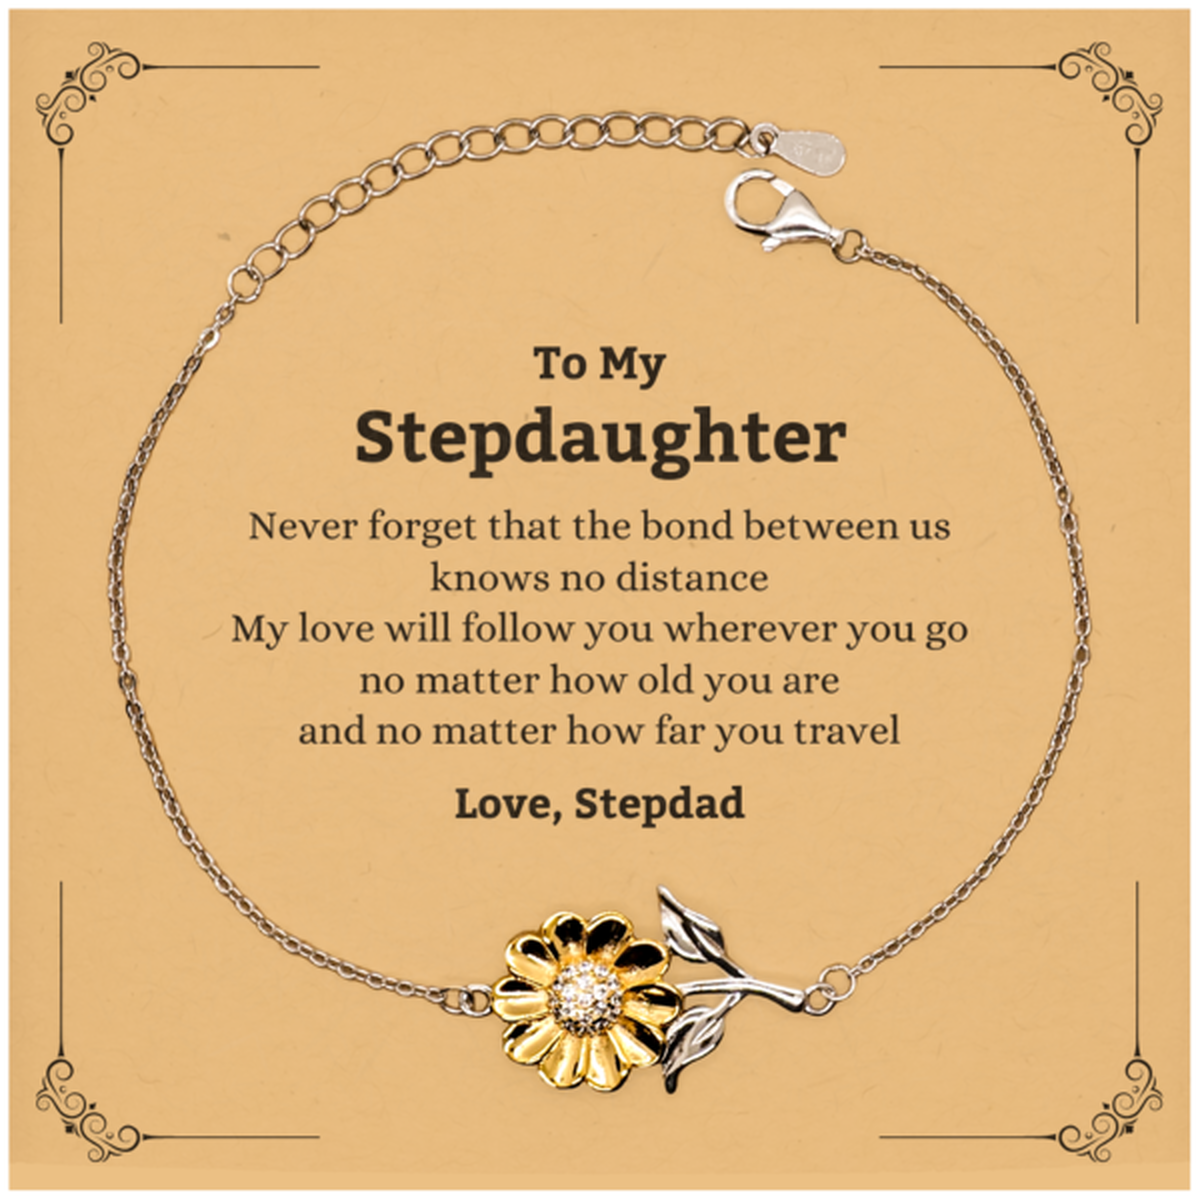 Stepdaughter Birthday Gifts from Stepdad, Adjustable Sunflower Bracelet for Stepdaughter Christmas Graduation Unique Gifts Stepdaughter Never forget that the bond between us knows no distance. Love, Stepdad